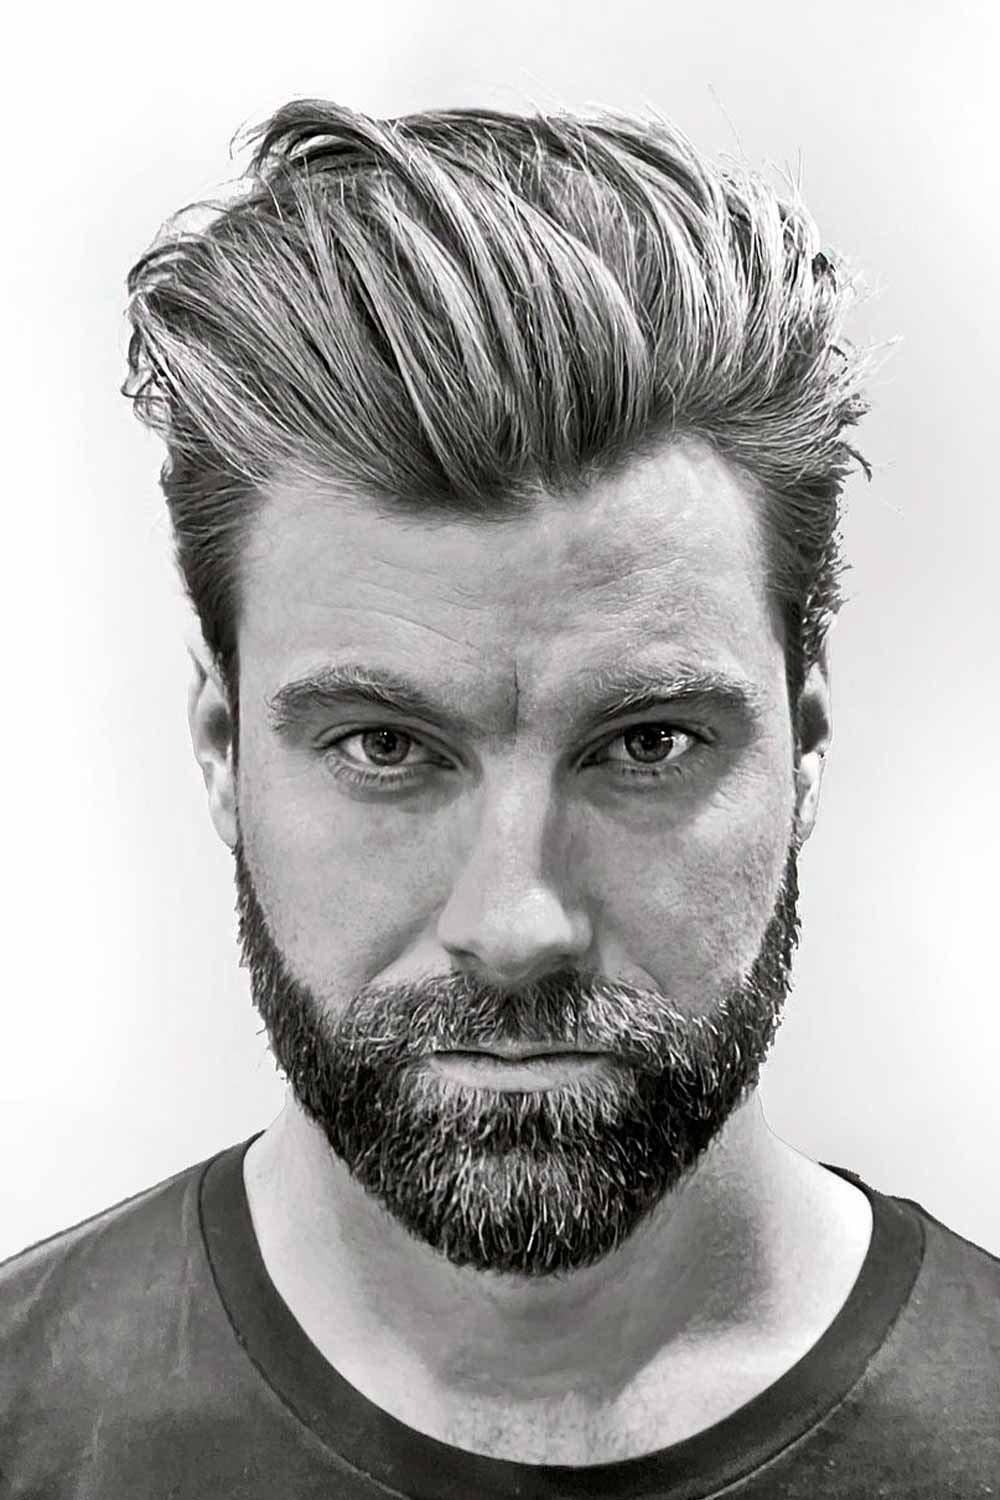 7 Facial Hair Styles EVERY Professional Man MUST Know (2022 Guide) - YouTube